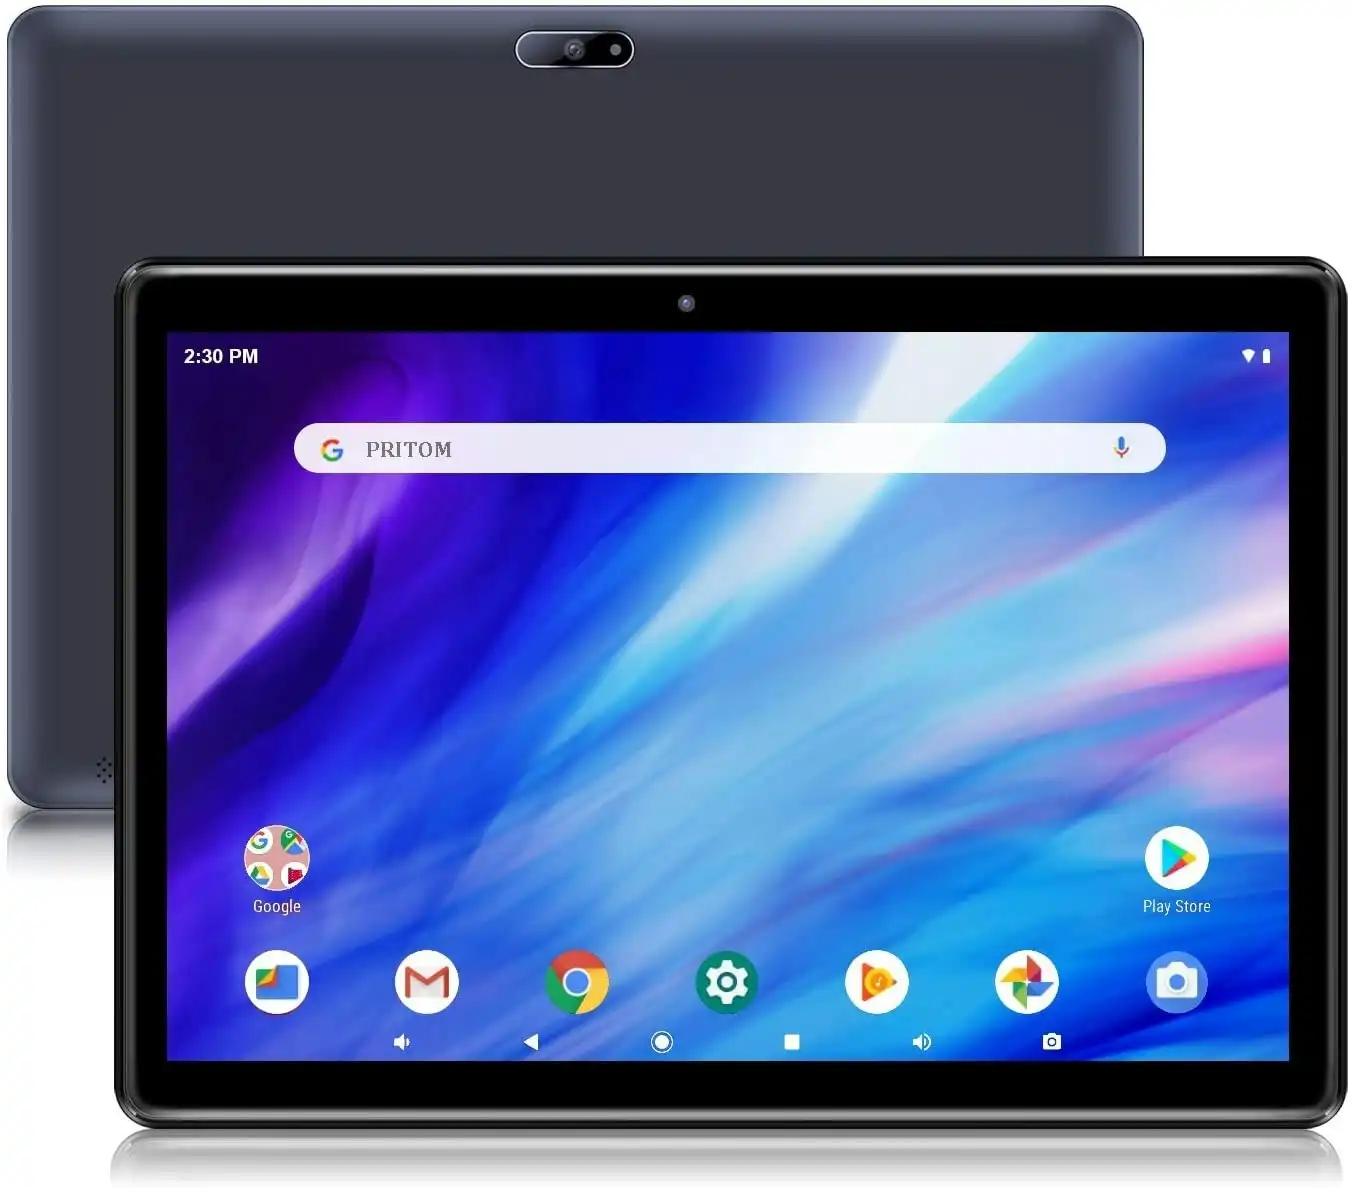 Android Tablet Pritom 10.1'' Android 10 Tablet, 2GB RAM, 32GB ROM, Quad Core Processor, HD IPS Screen, 2.0 Front + 8.0 MP Rear Camera, Wi-Fi, Bluetoot